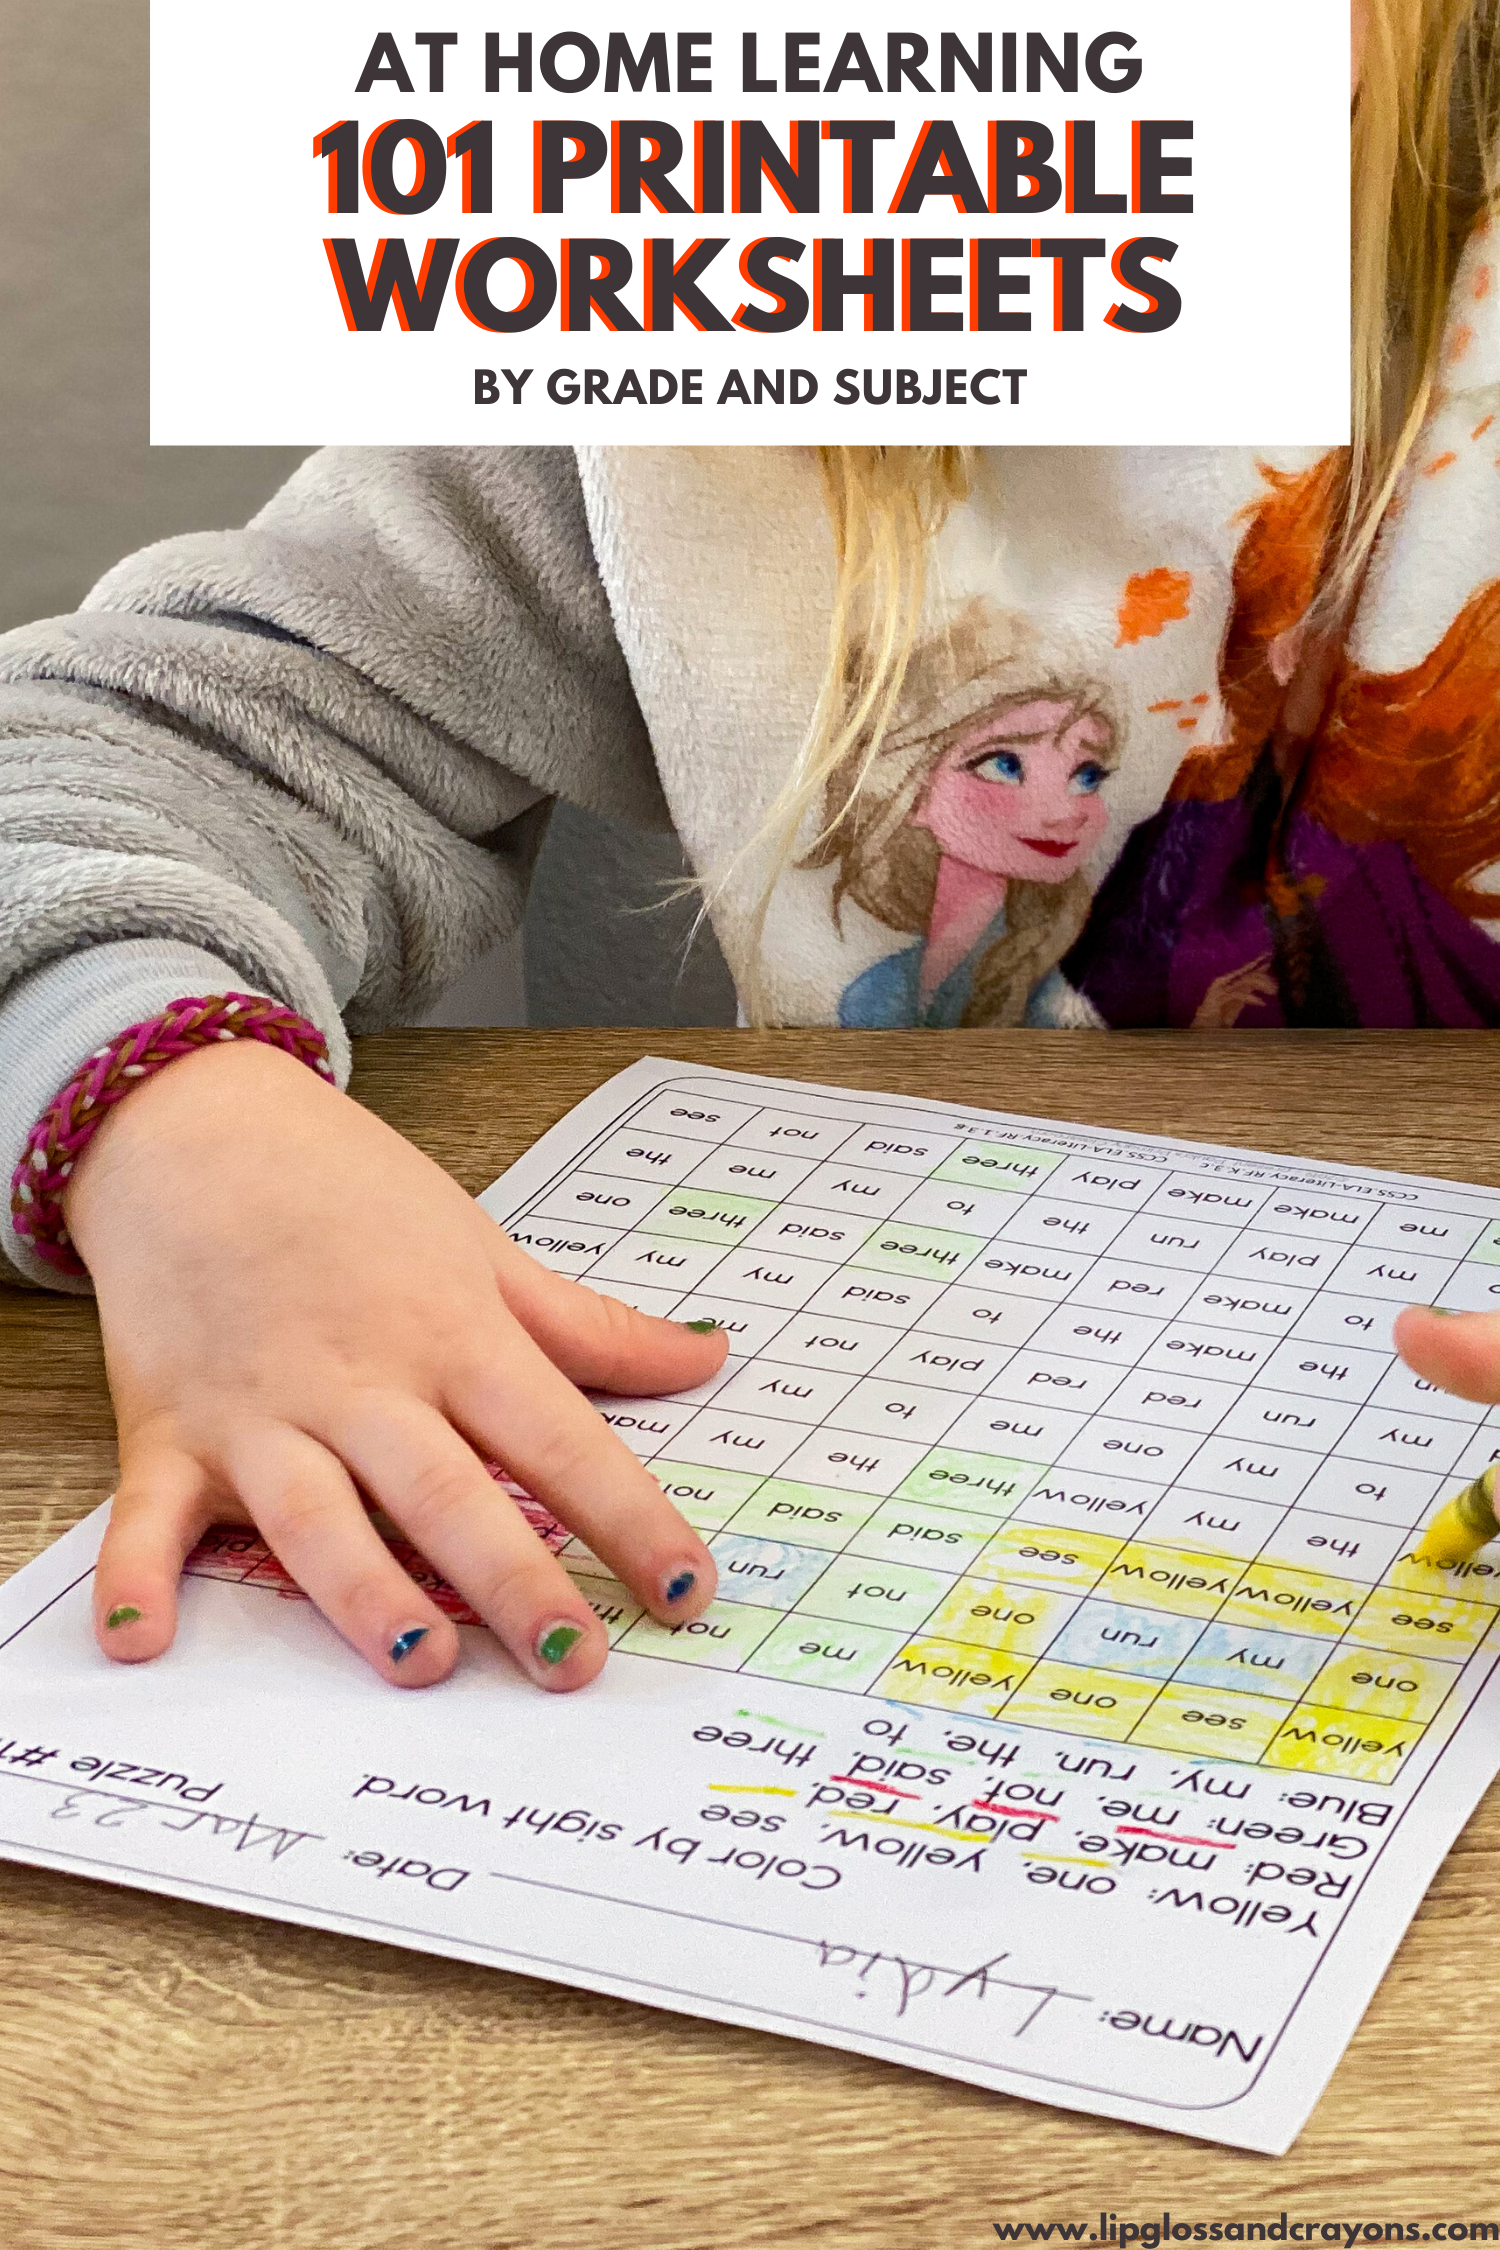 Working from home? These printable worksheets are a great option for independent work!